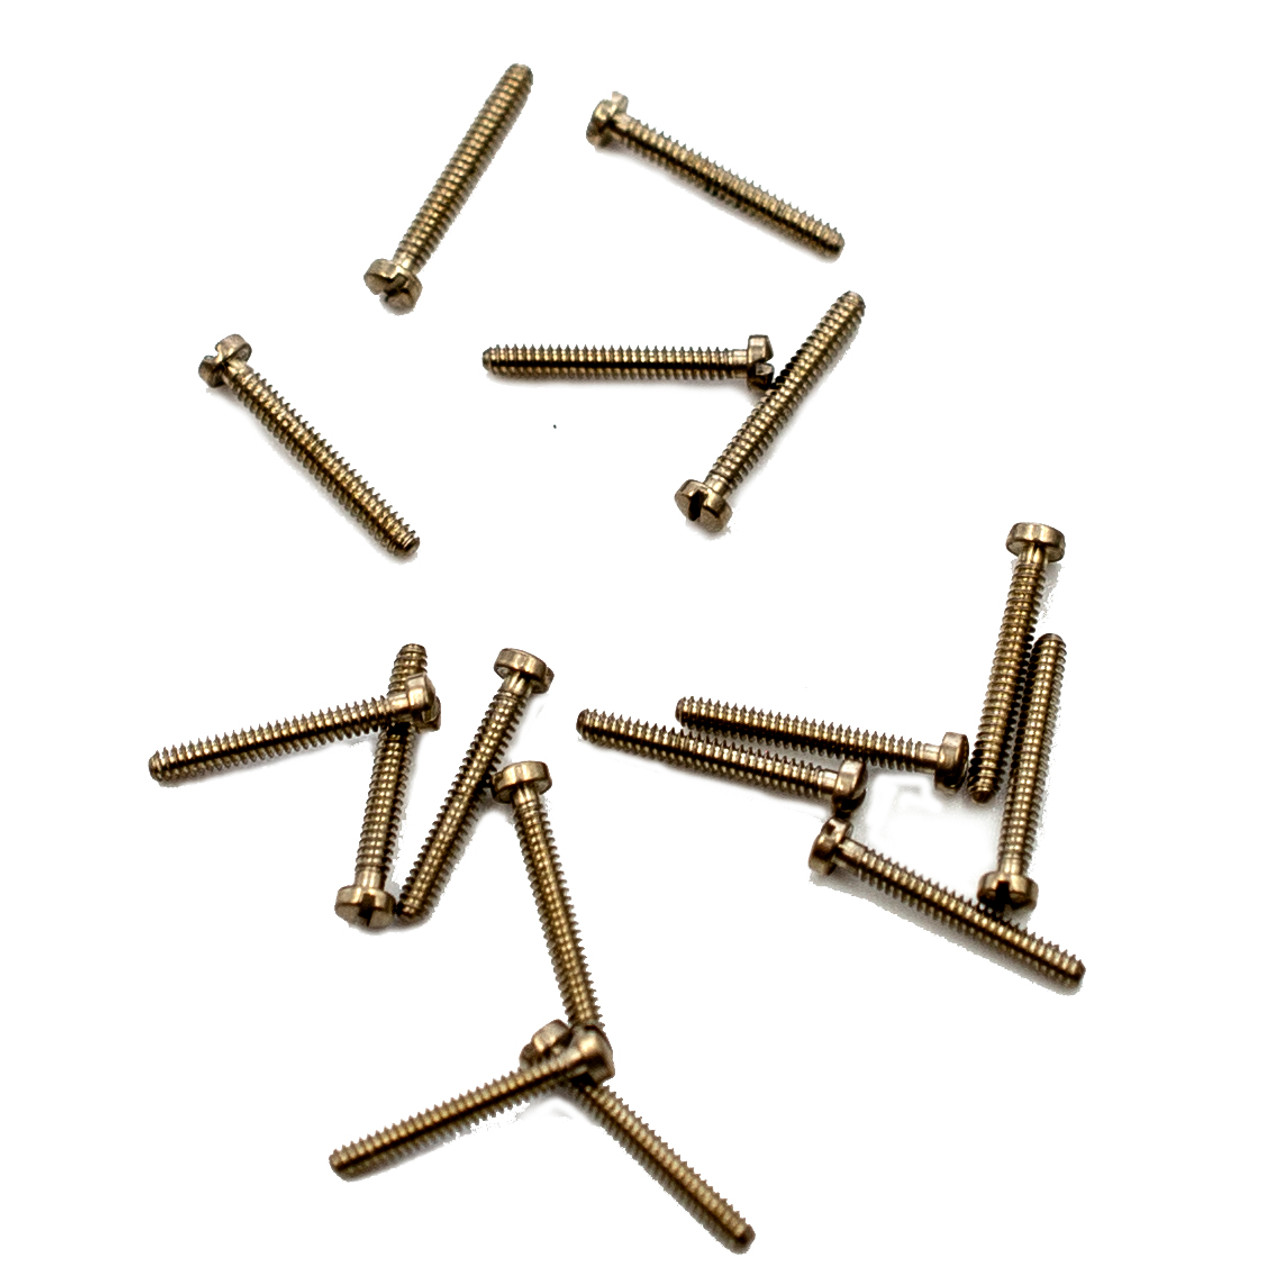 Machine Screw,   Thread 00-90 (0.046") Overall Length (OAL) 9.4mm, Threaded Length 5/16", Head diameter 2.0mm,    Material: Nickel Silver, a premium copper alloy resistant to tarnish and often used in Jewelry and eyewear.   
Part Color is Silver,    Also available in Gold color finish (11111G)

Matching hex nut # 11101 or 11101G in gold.


Price is for 100 count package with bulk pricing available.
Please contact us for bulk pricing pricing or any additional questions or information.